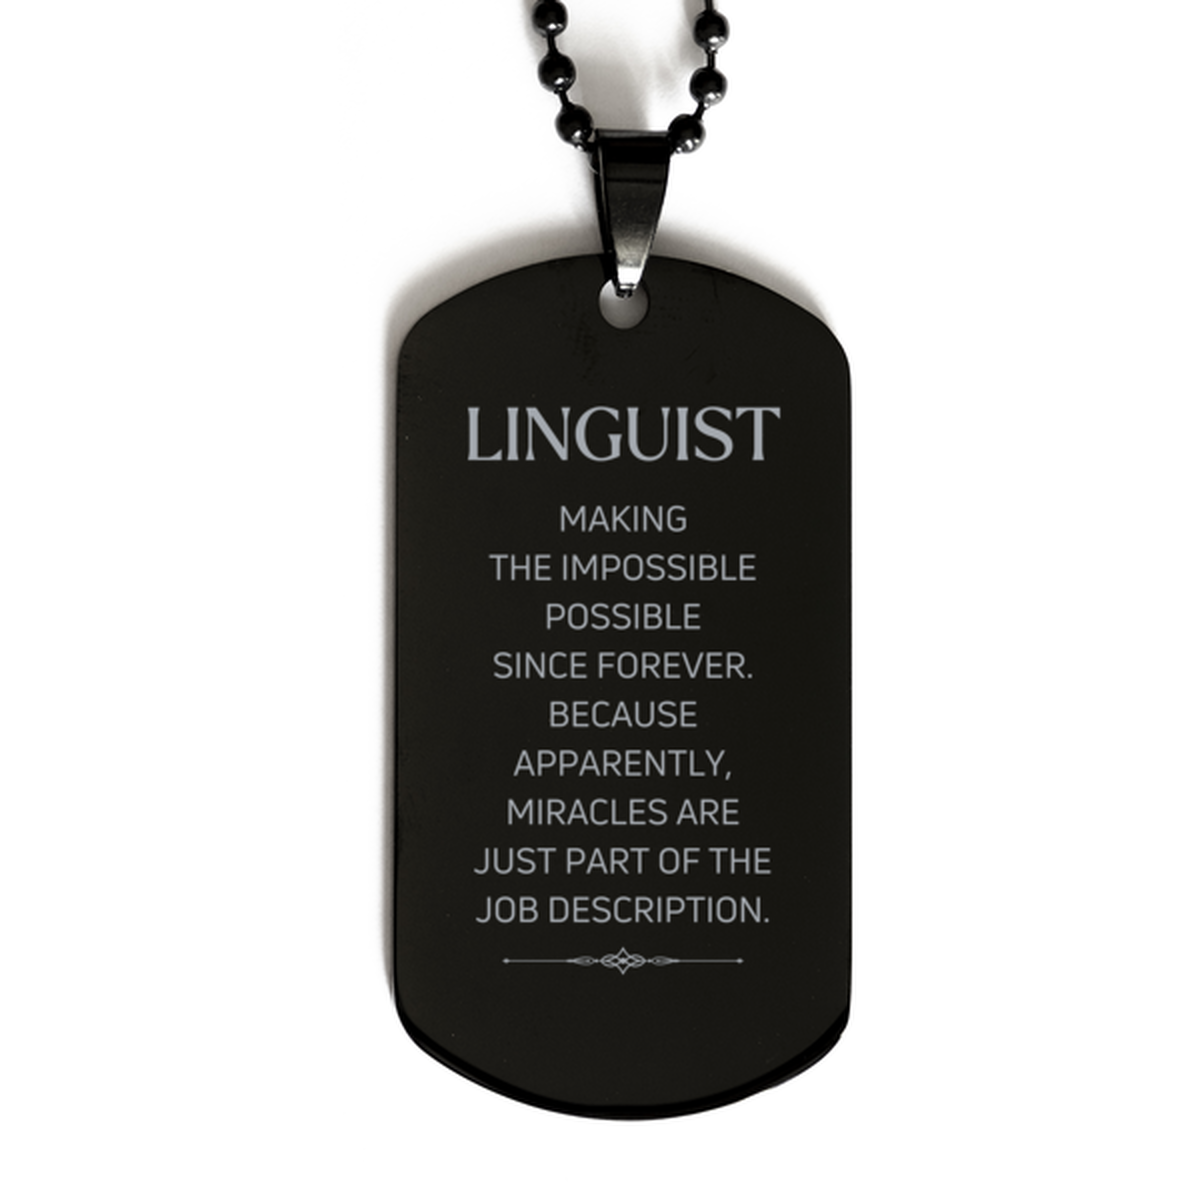 Funny Linguist Gifts, Miracles are just part of the job description, Inspirational Birthday Black Dog Tag For Linguist, Men, Women, Coworkers, Friends, Boss